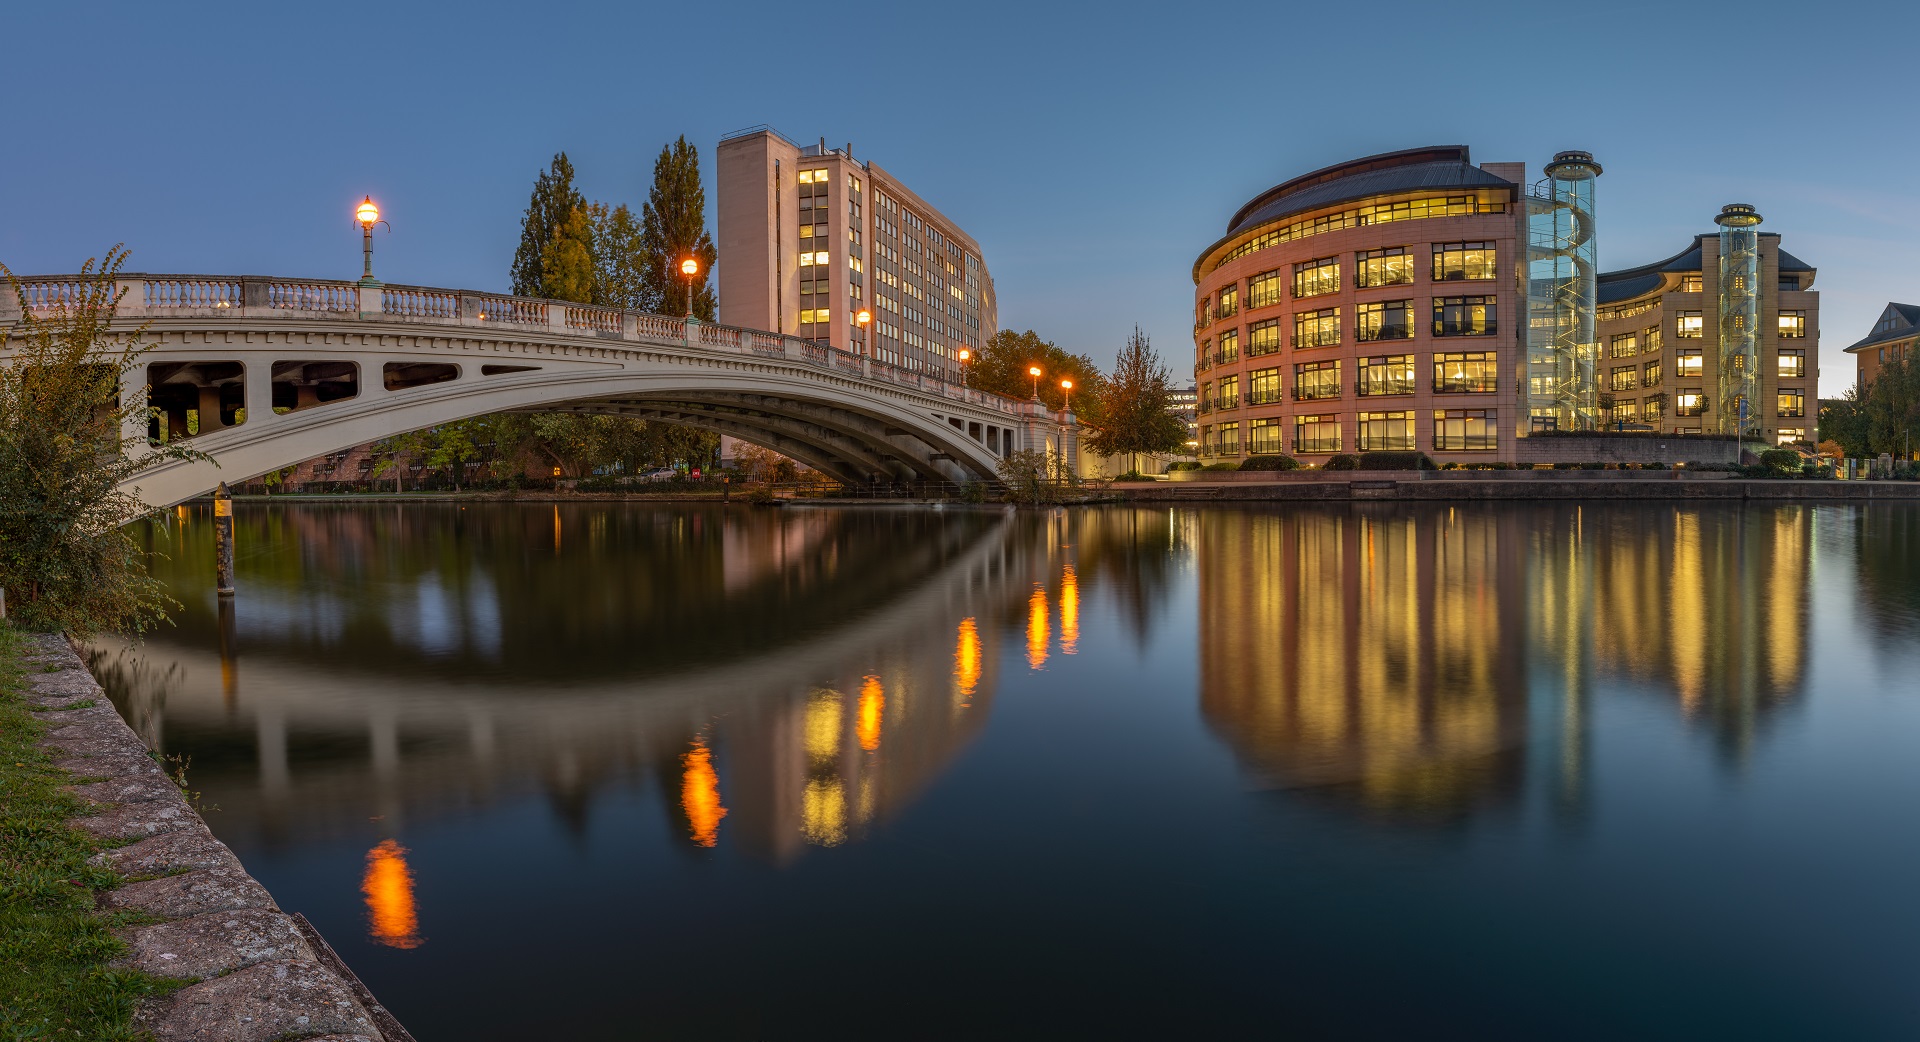 bridge over the river thames in reading